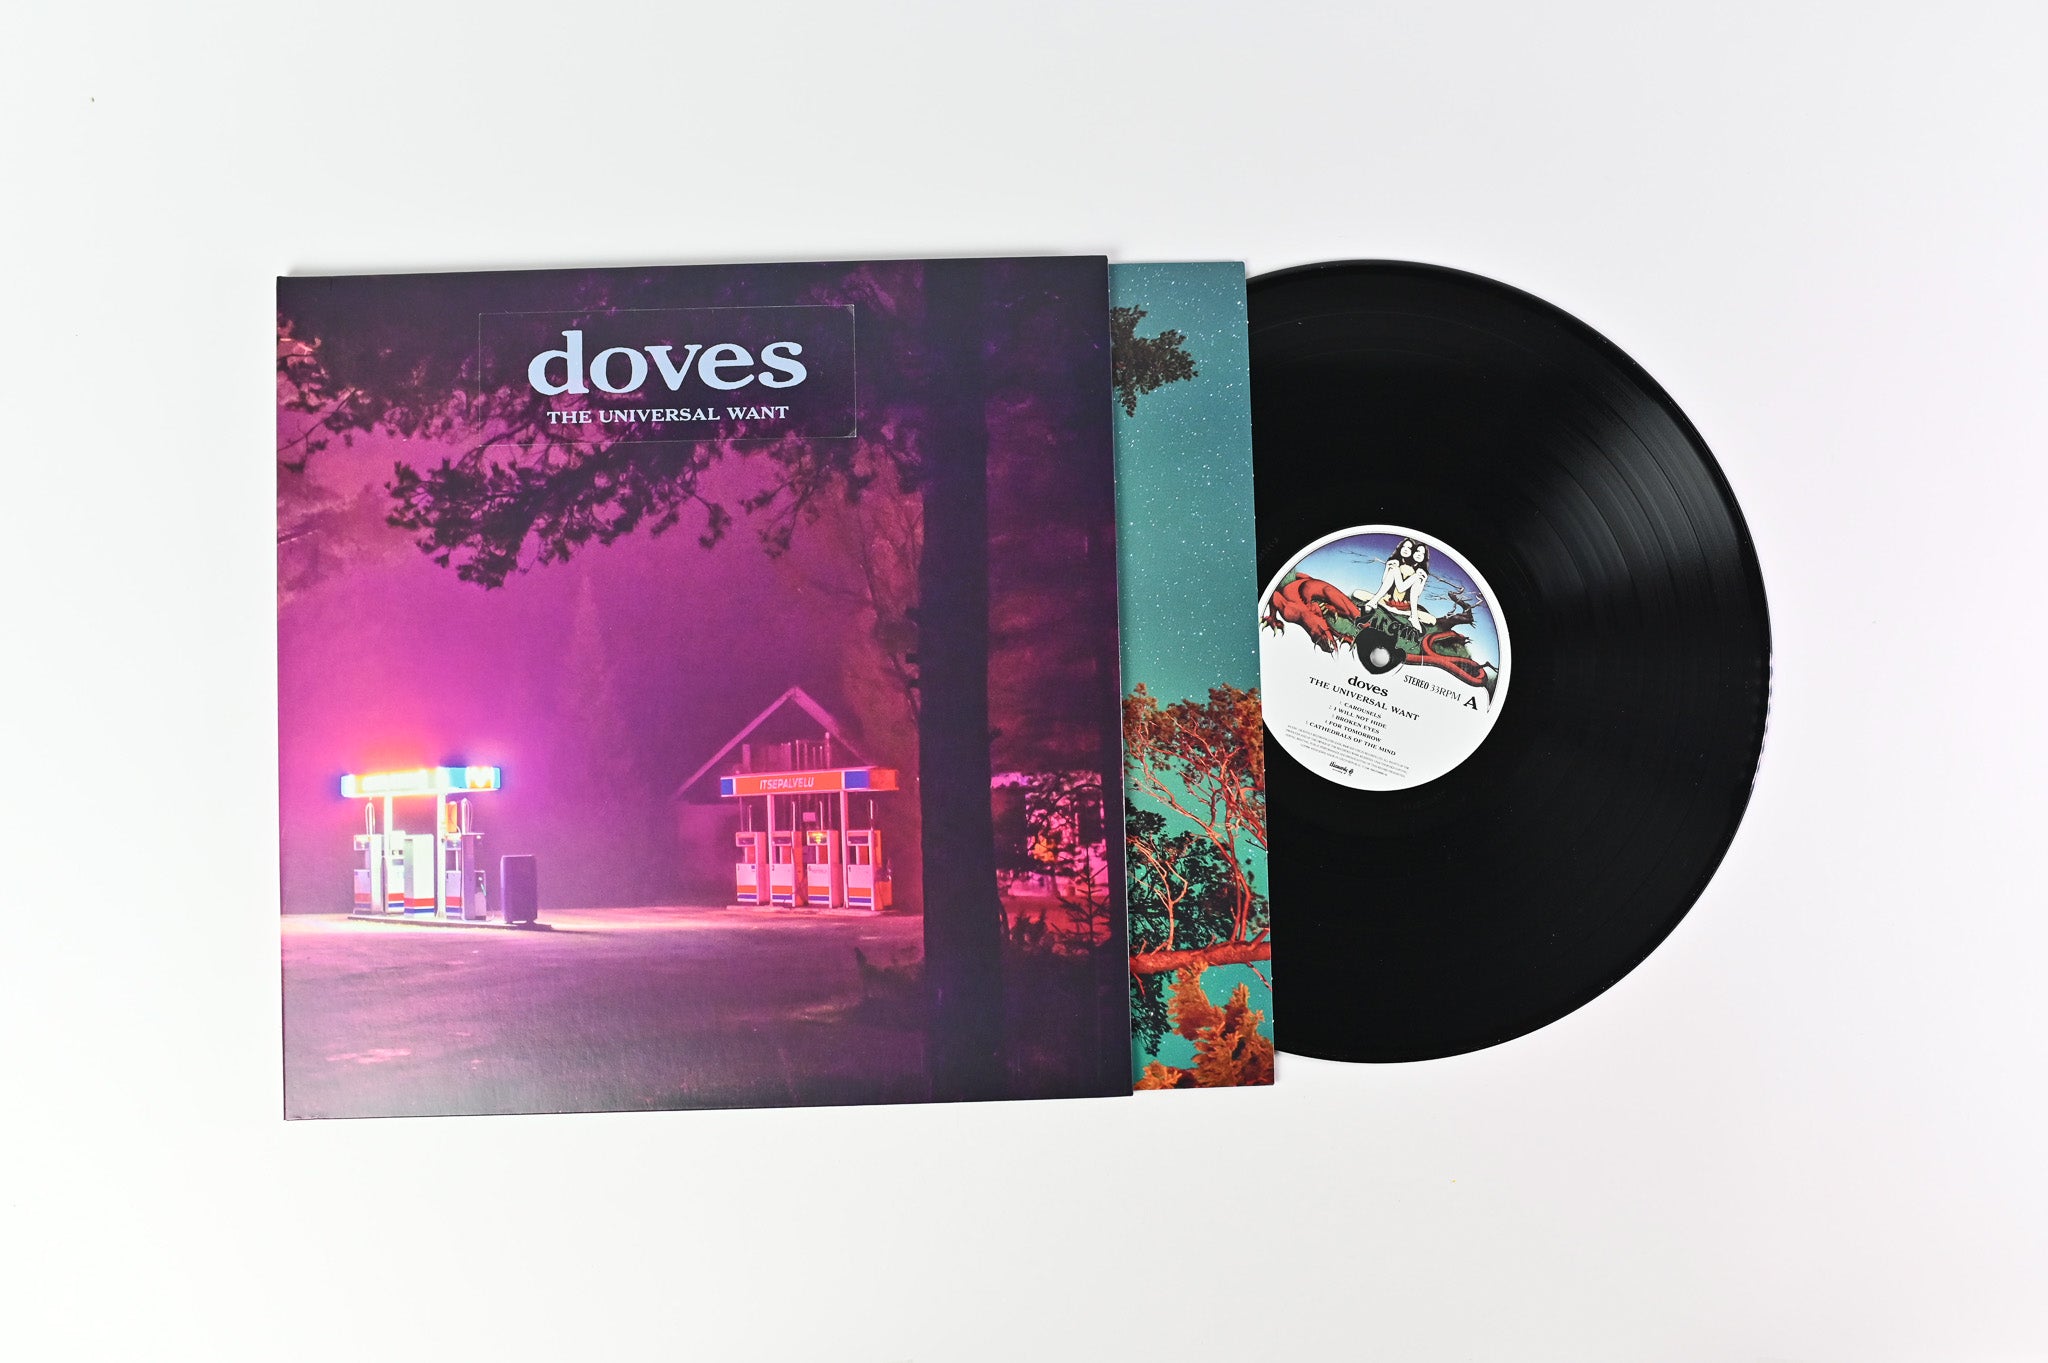 Doves - The Universal Want on Virgin